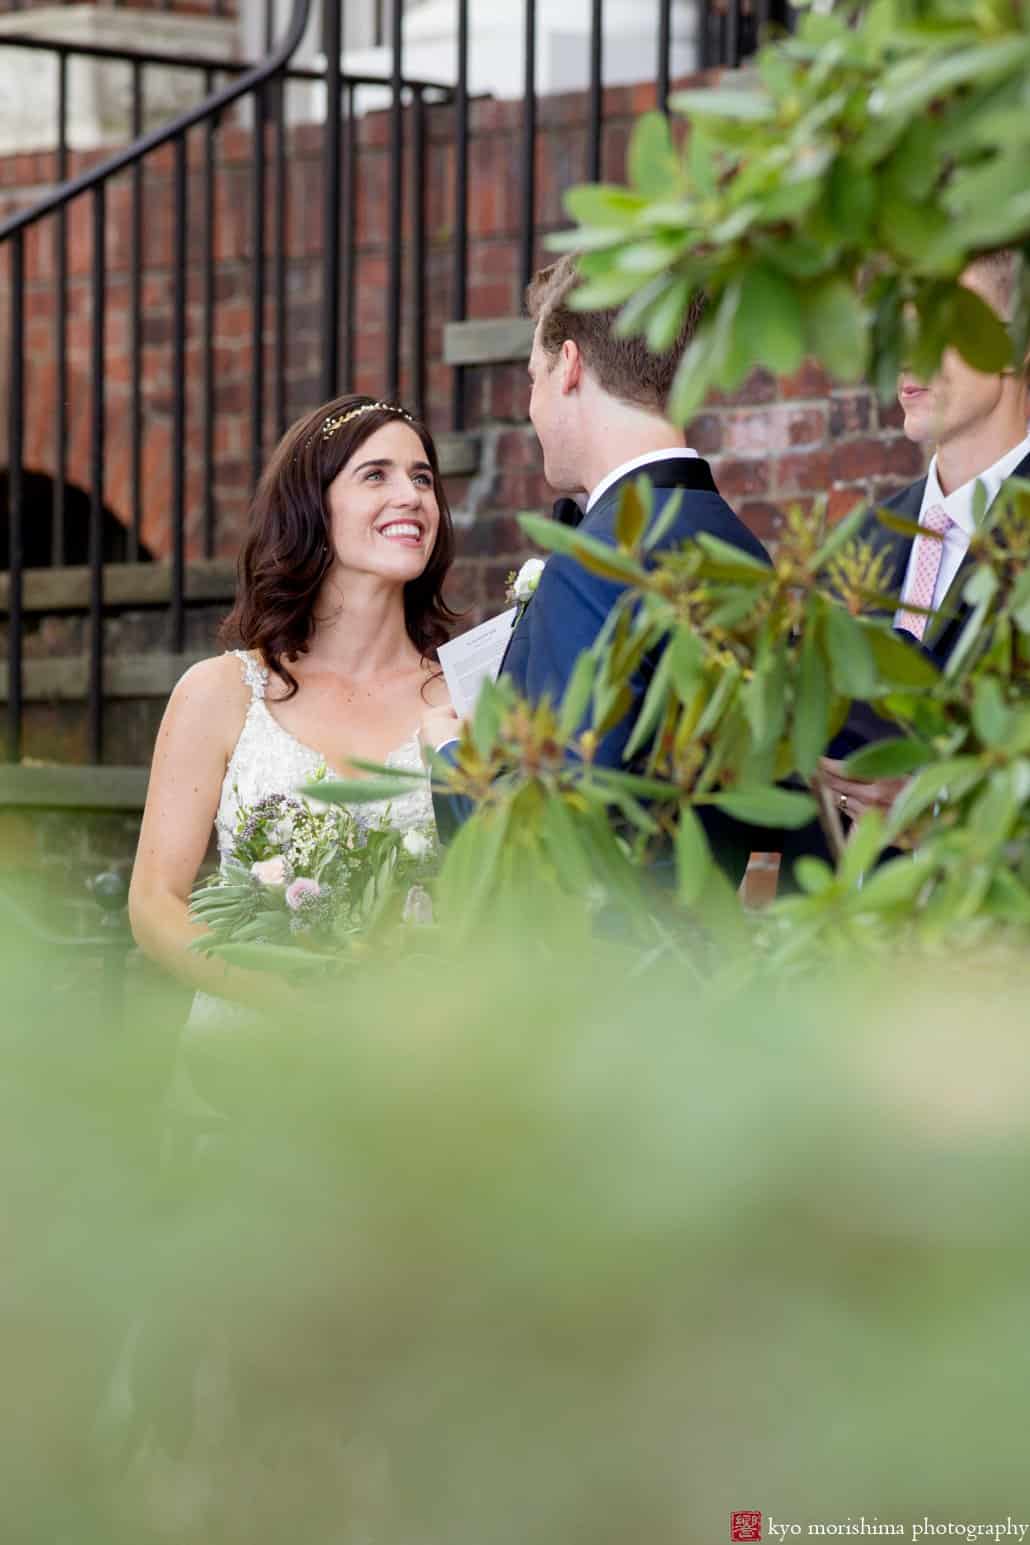 Bride smiles up at groom during outdoor wedding ceremony at Governors Island, photographed by Kyo Morishima